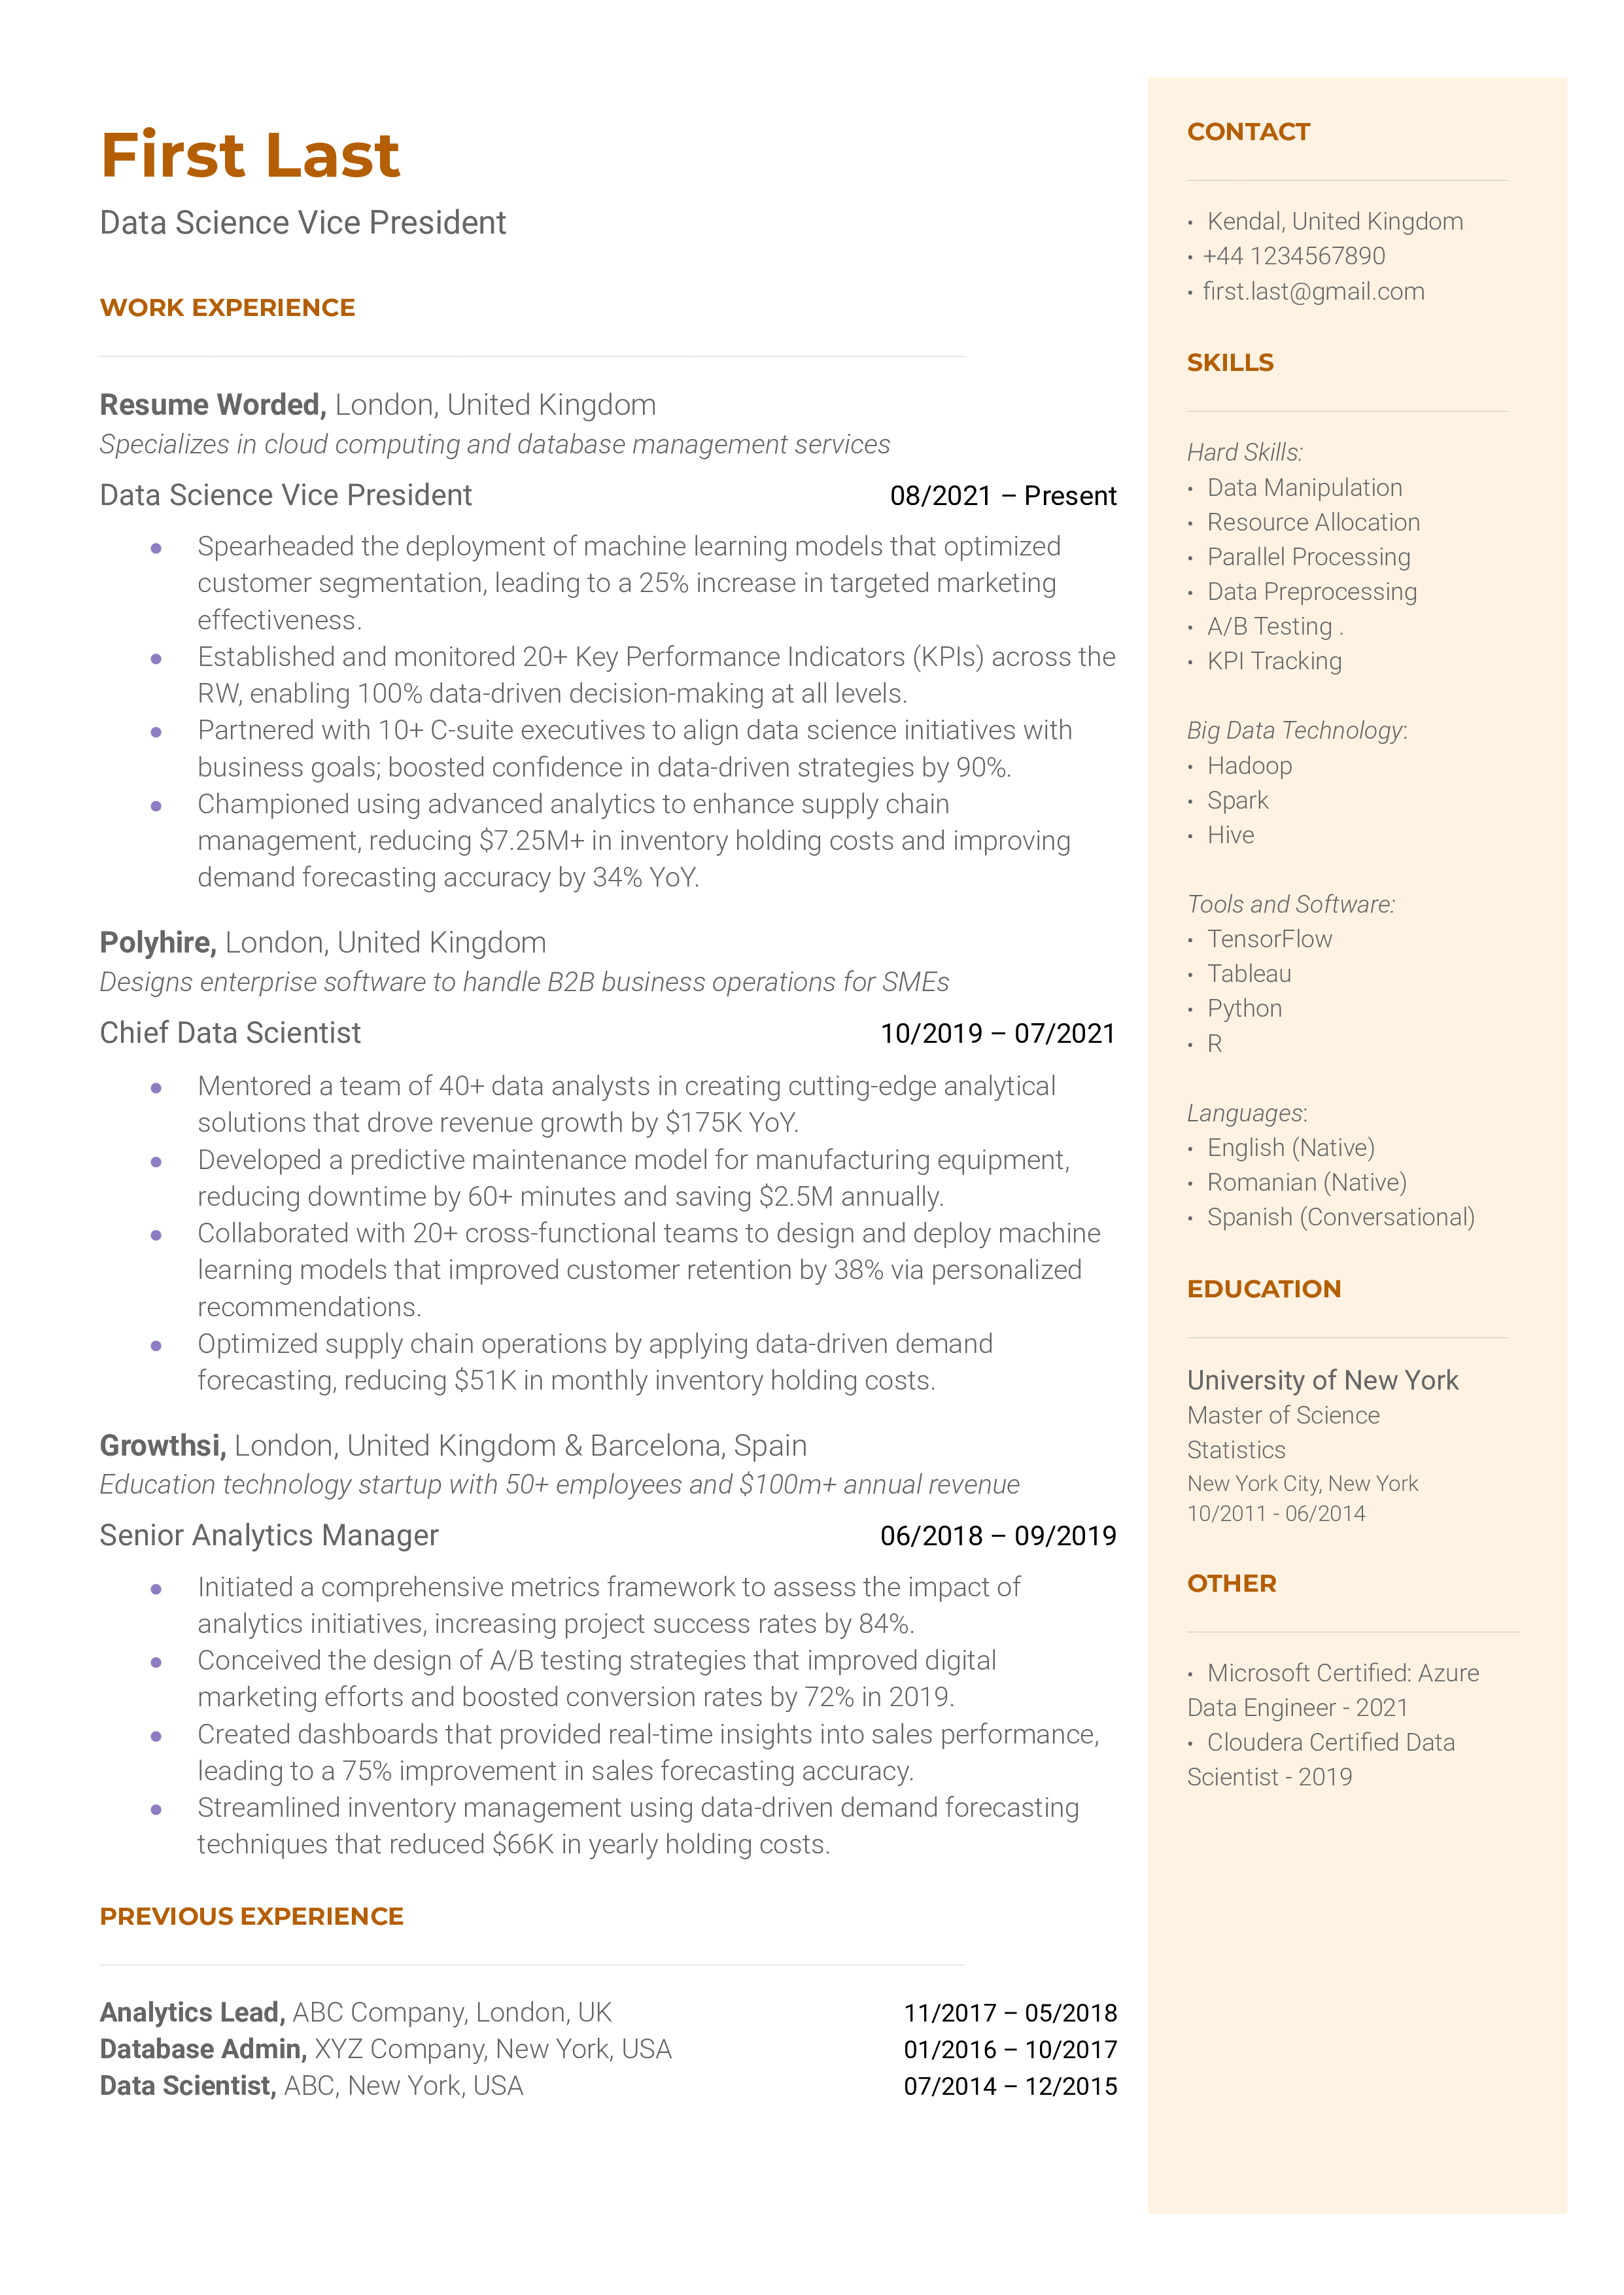 A CV for a Vice President of Data Science showcasing technical, business, and leadership expertise.